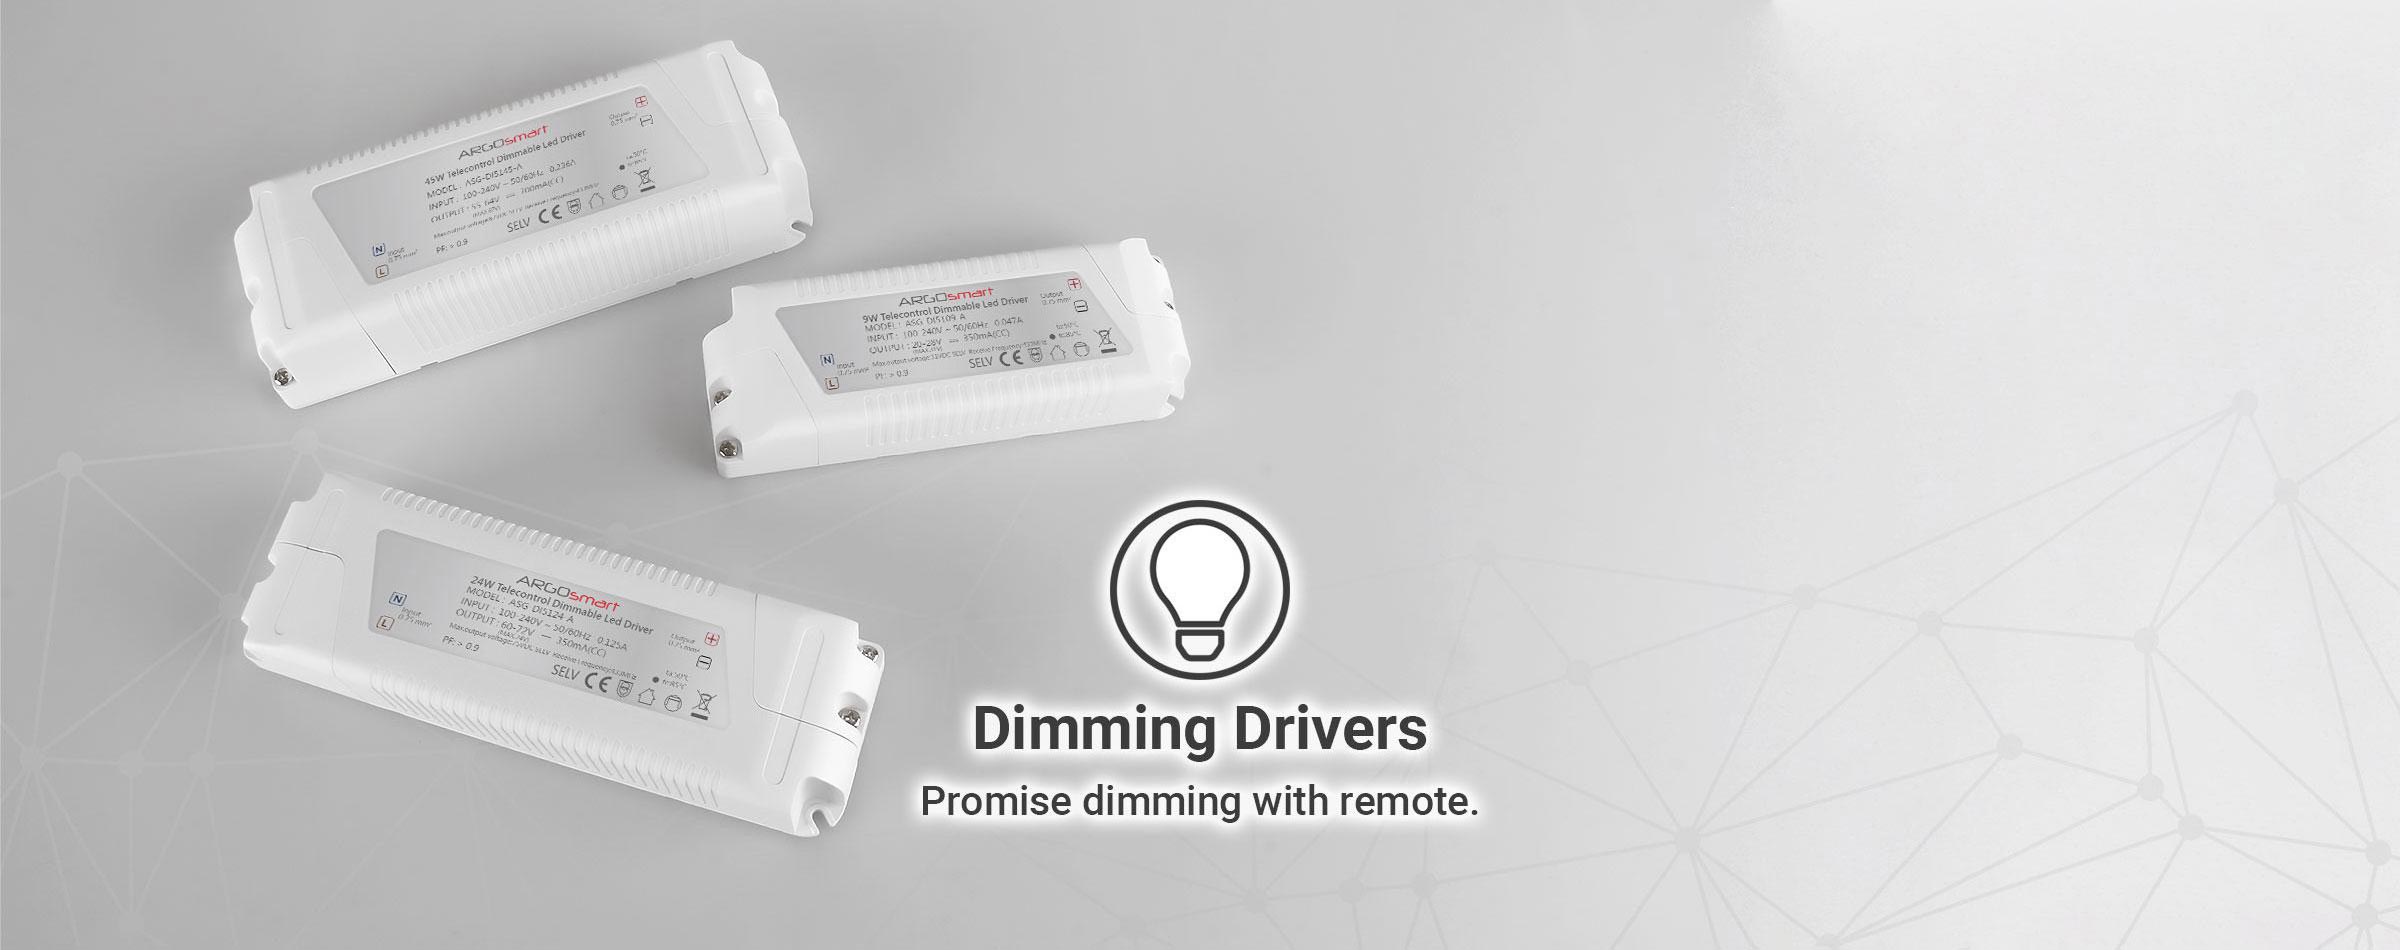 Dimming Drivers